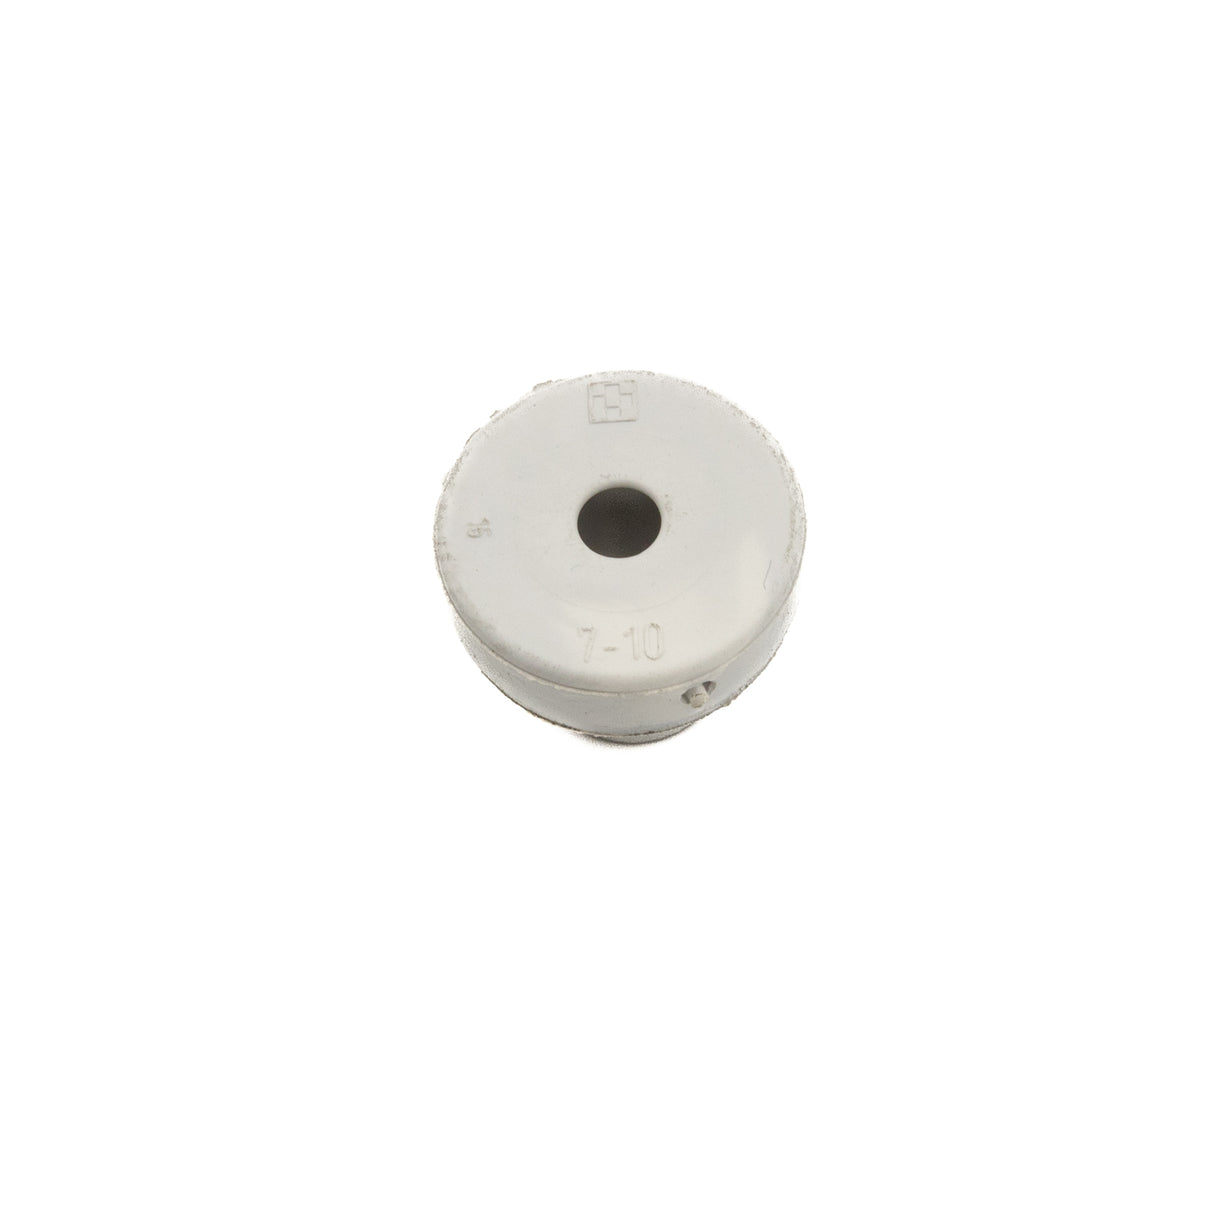 Boxco BC-RG-PG36 Rubber Cable Gland Grommet 48 mm Hole Ivory - PHOTO 2